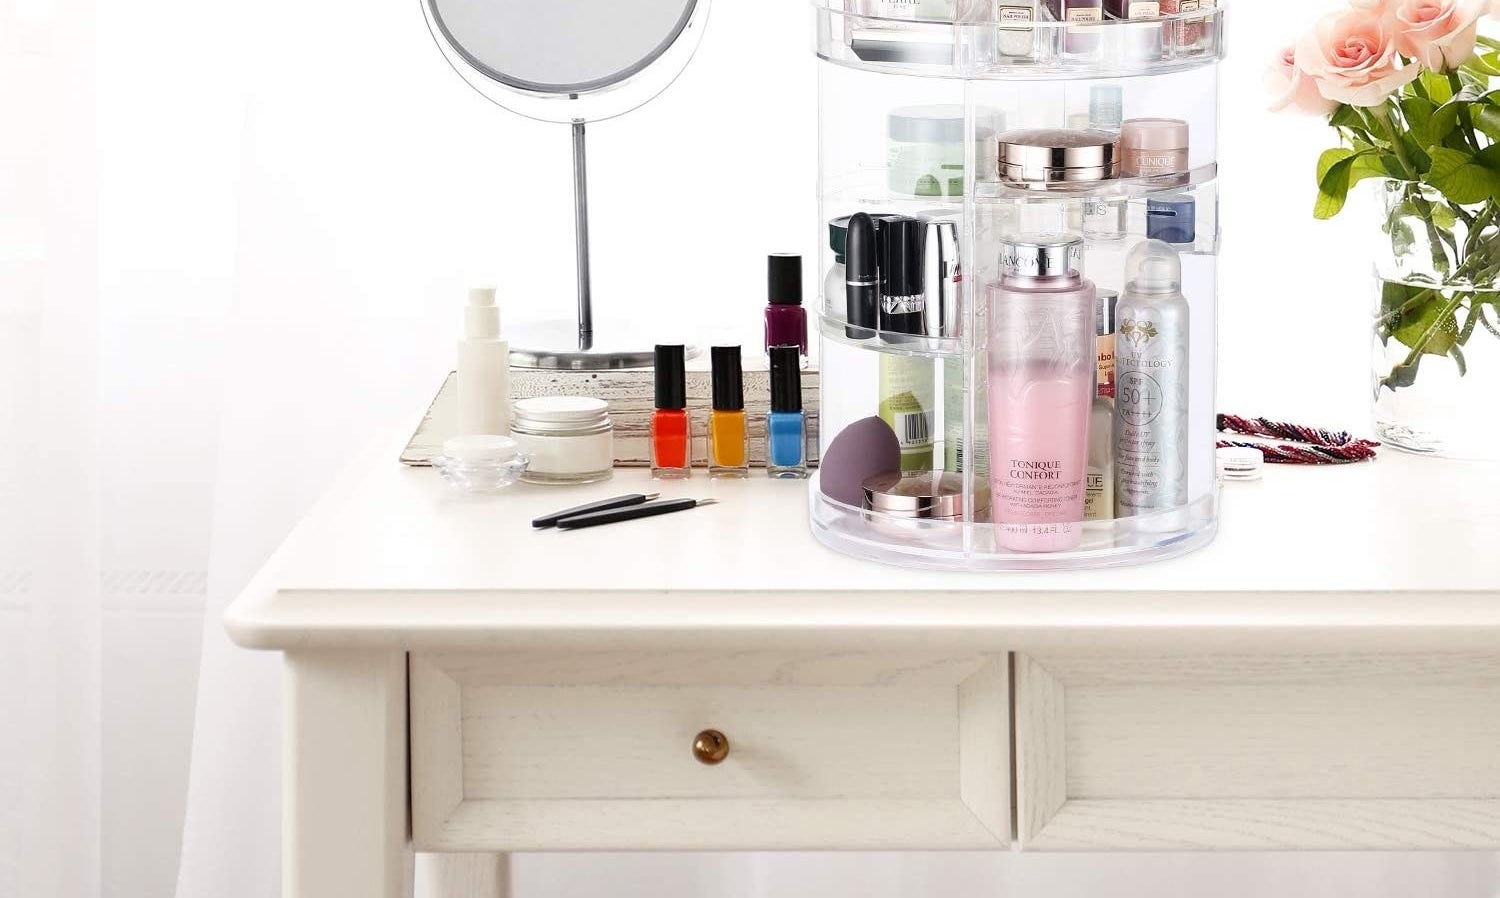 A makeup caddy that rotates and is filled with makeup